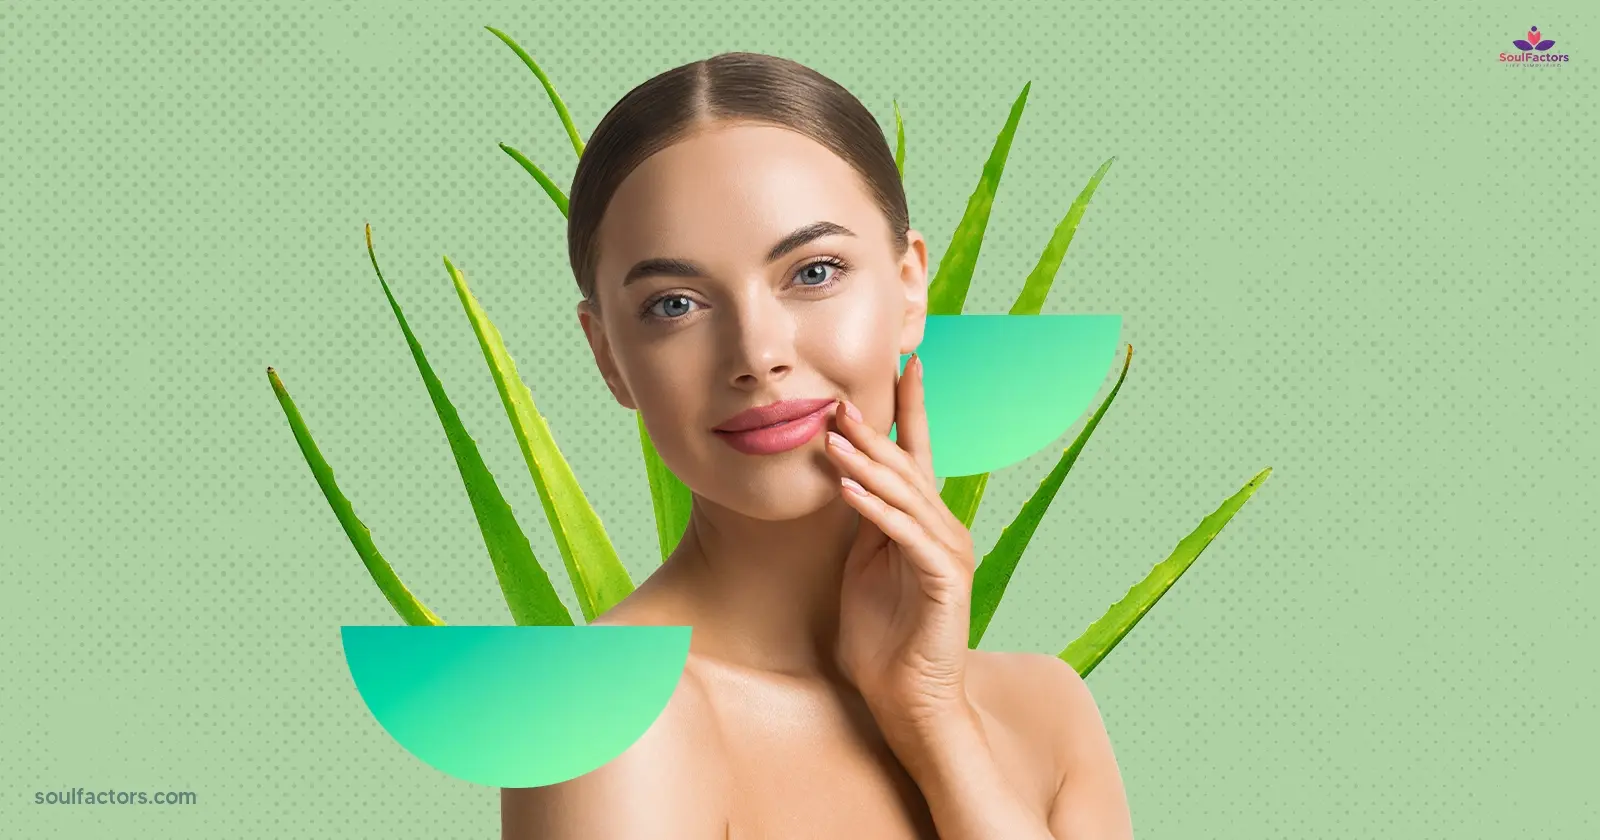 Say Hello to Aloe Skin How to Use Aloe Vera Gel on Face at Night - Feature